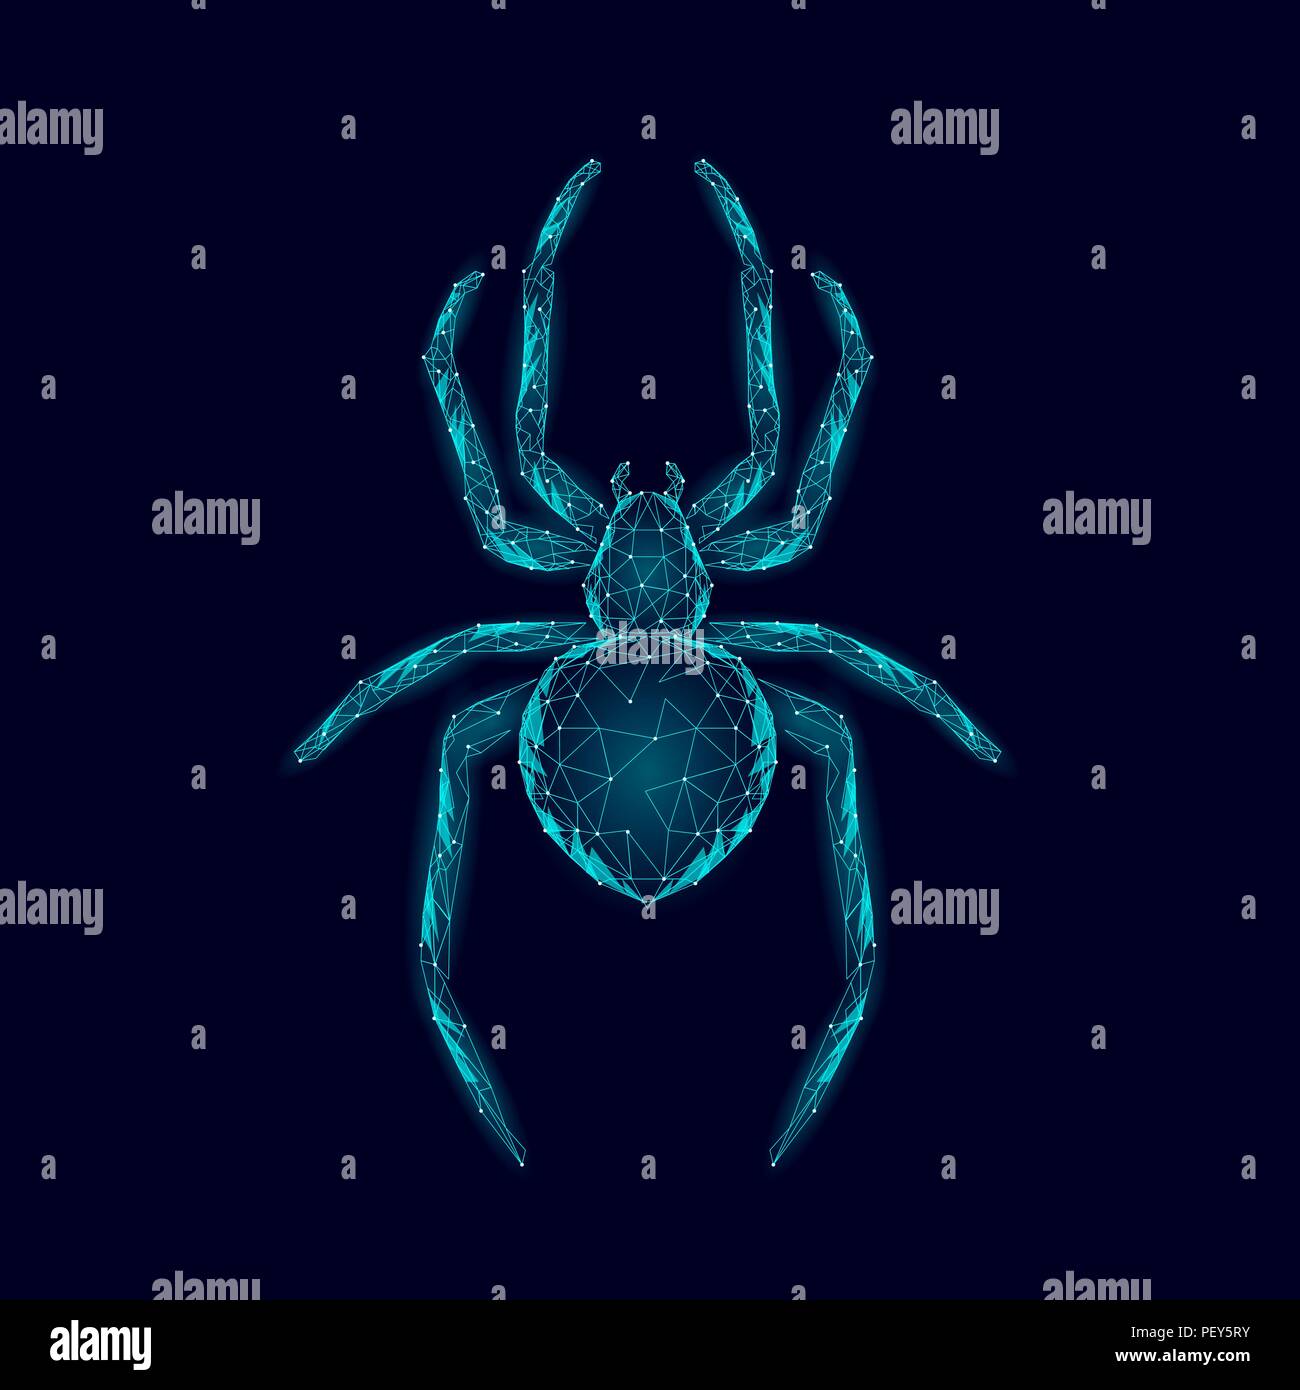 Low poly spider dangerous arachnids. Web security virus data safety antivirus concept. Polygonal modern blue glowing design business concept. Cyber crime web insect technology vector illustration Stock Vector